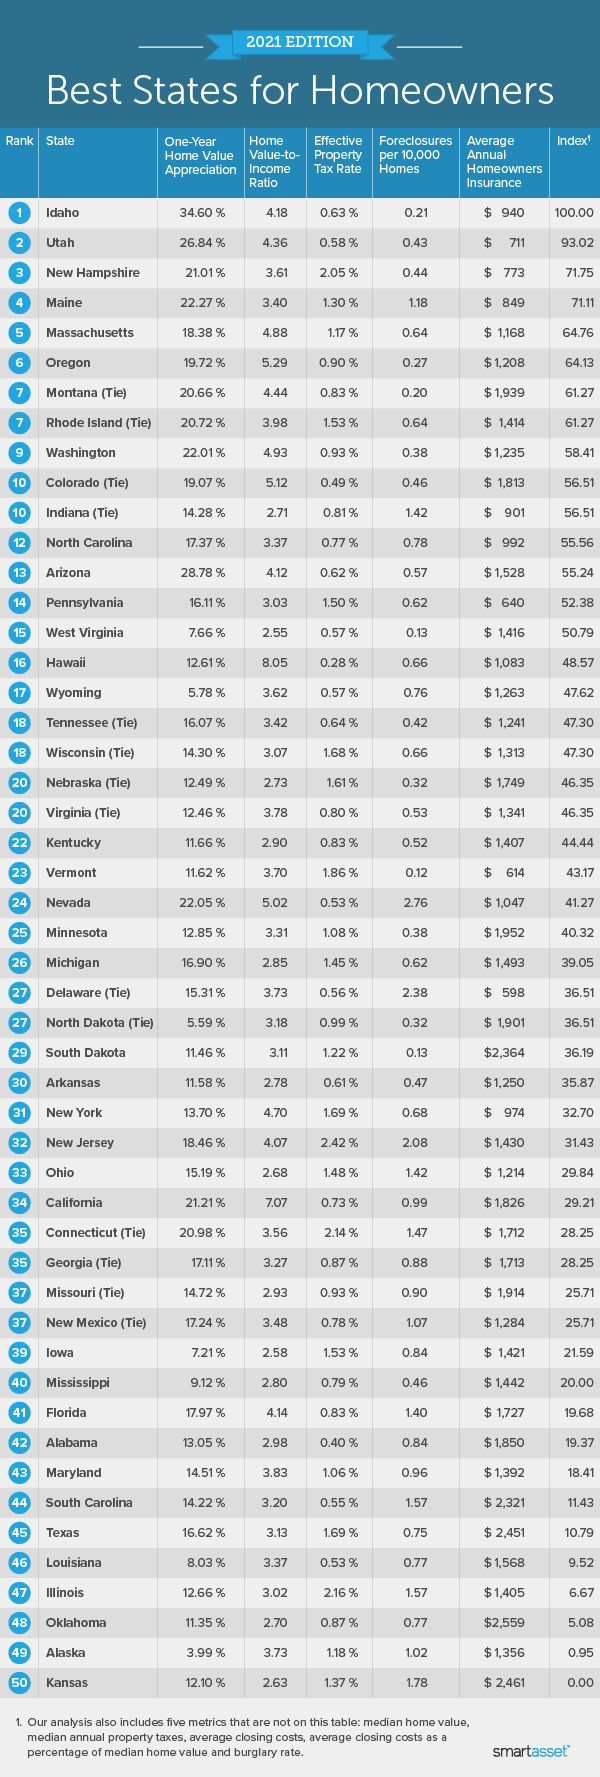 Image is a table by SmartAsset titled "2021 Edition: Best States for Homeowners."